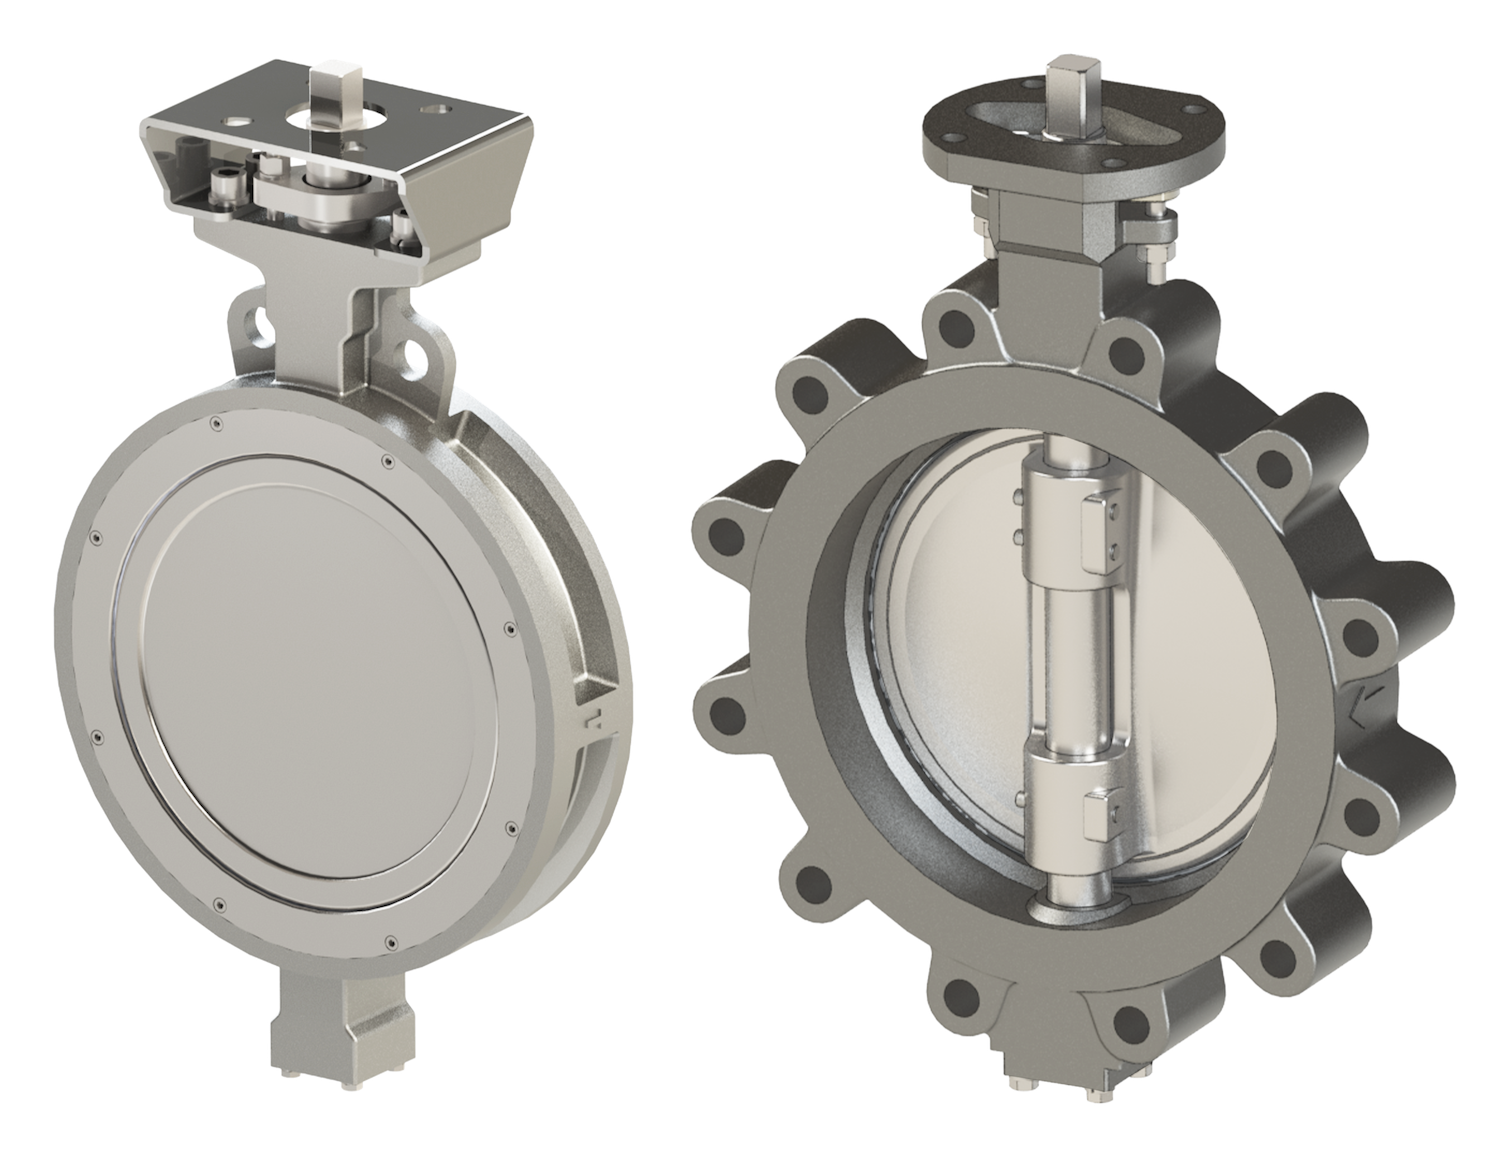 Lug, Wafer, & Flanged High Performance Butterfly Valves